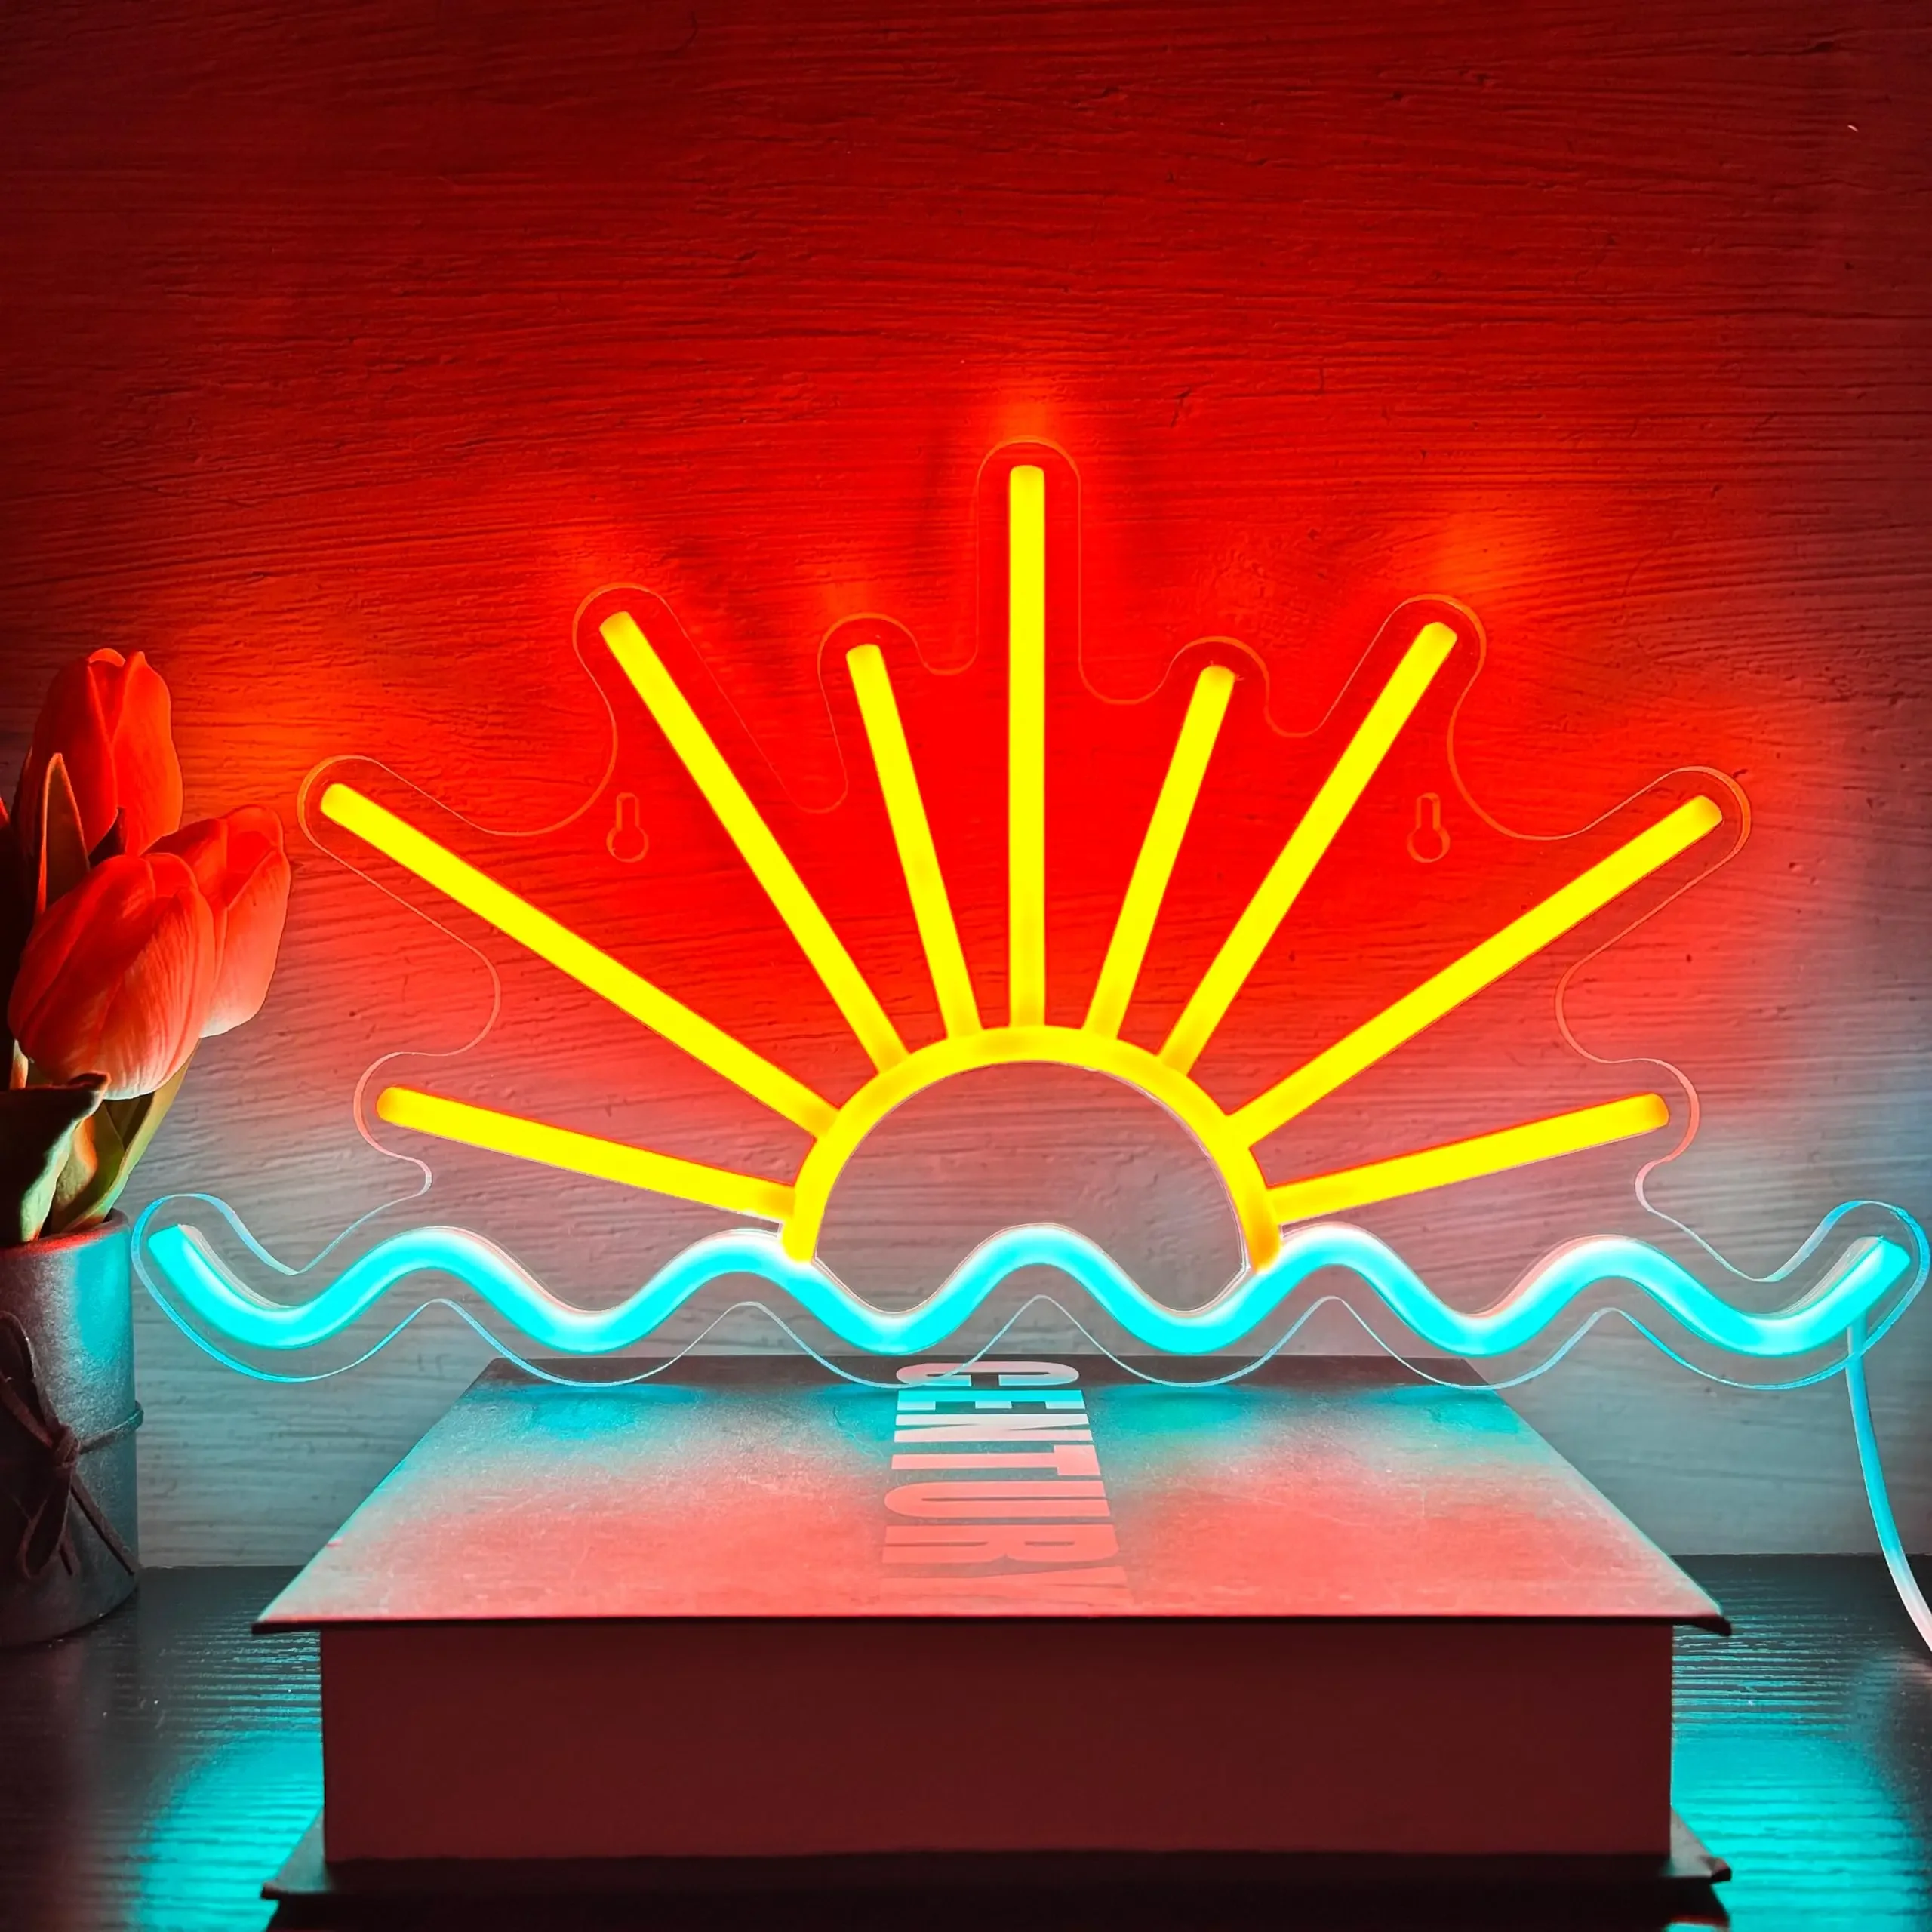 

Sunrise Sunset Neon Sign LED Neon Light for Beach Sea Wave Wall Art Man Cave Bedroom Wedding Living Room Party Bar Wall Decor